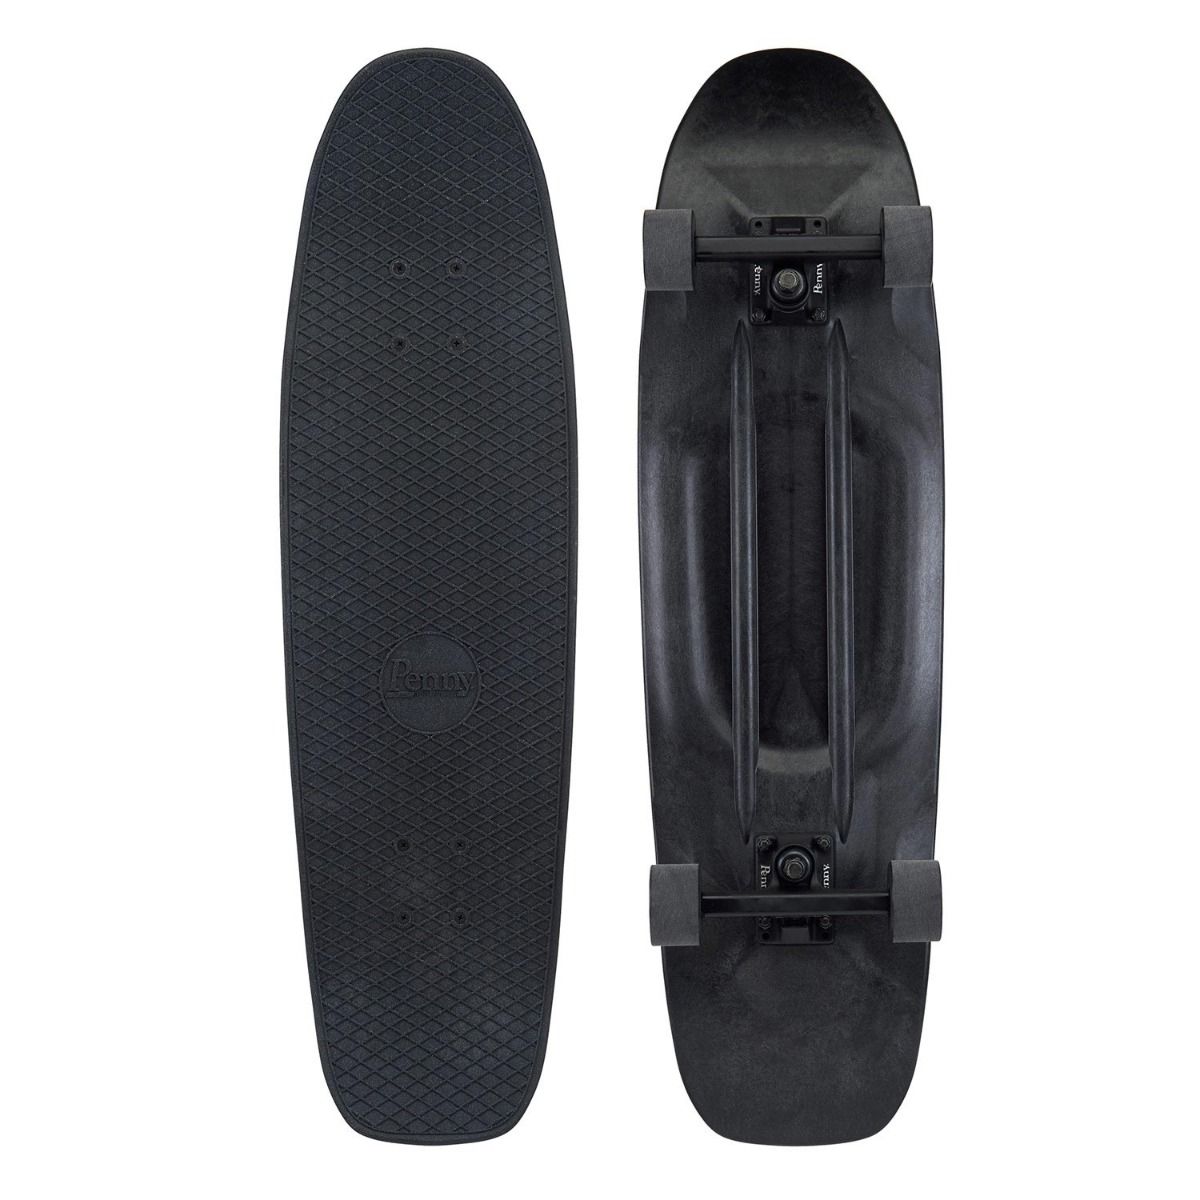 Blackout Complete Cruiser by Penny Skateboards